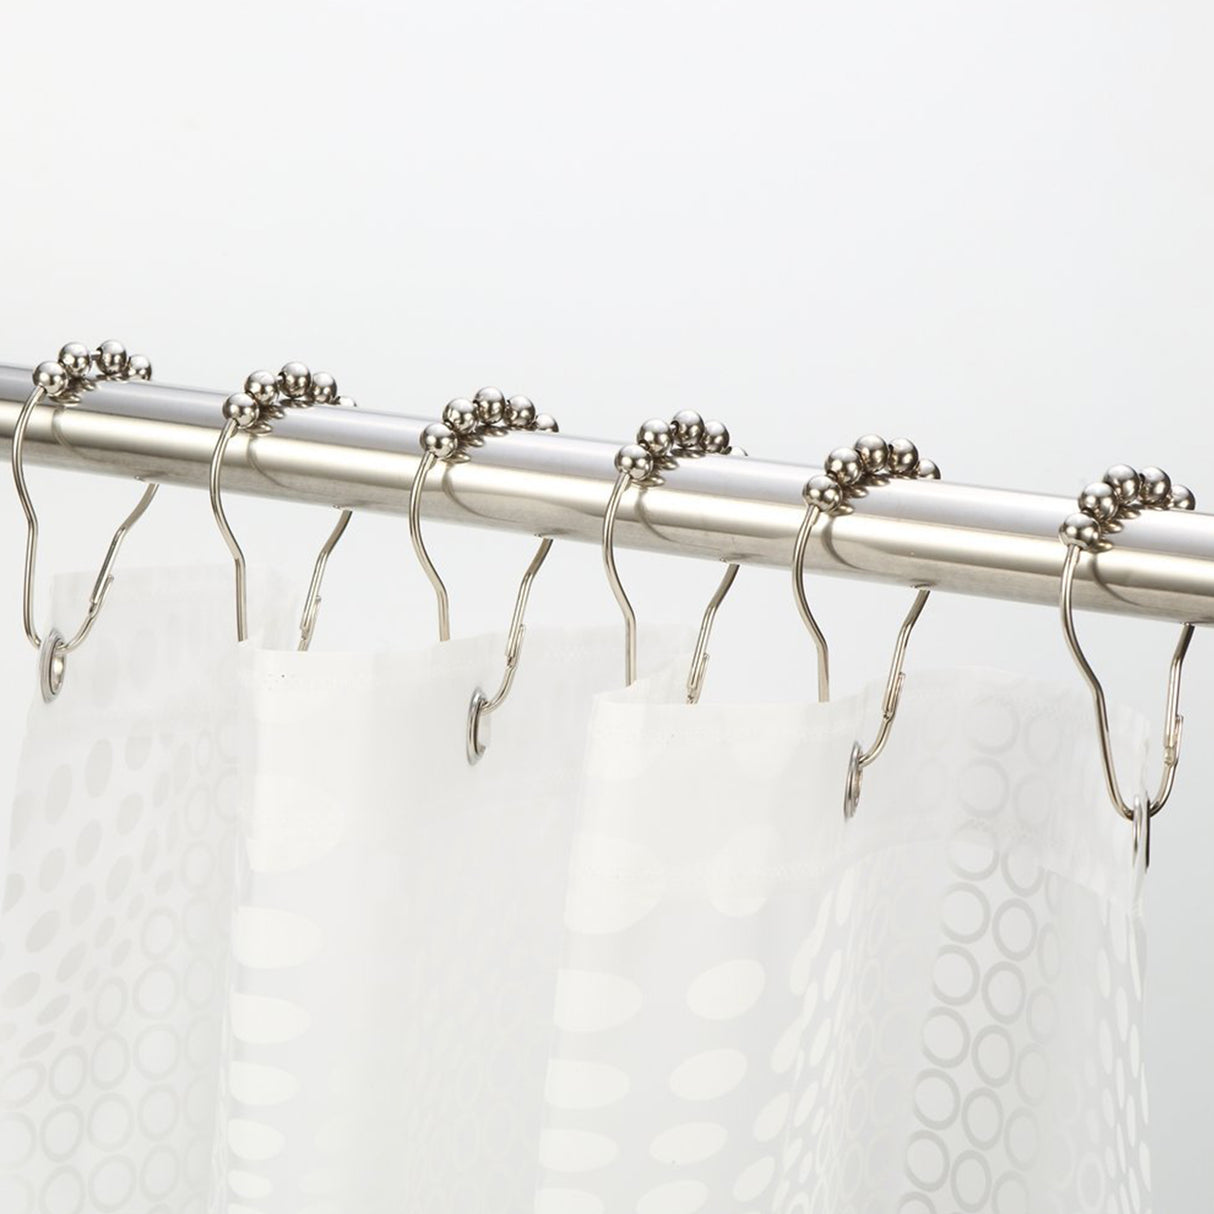 Amazer Stainless Steel Shower Curtain Rings and Hooks for Bathroom